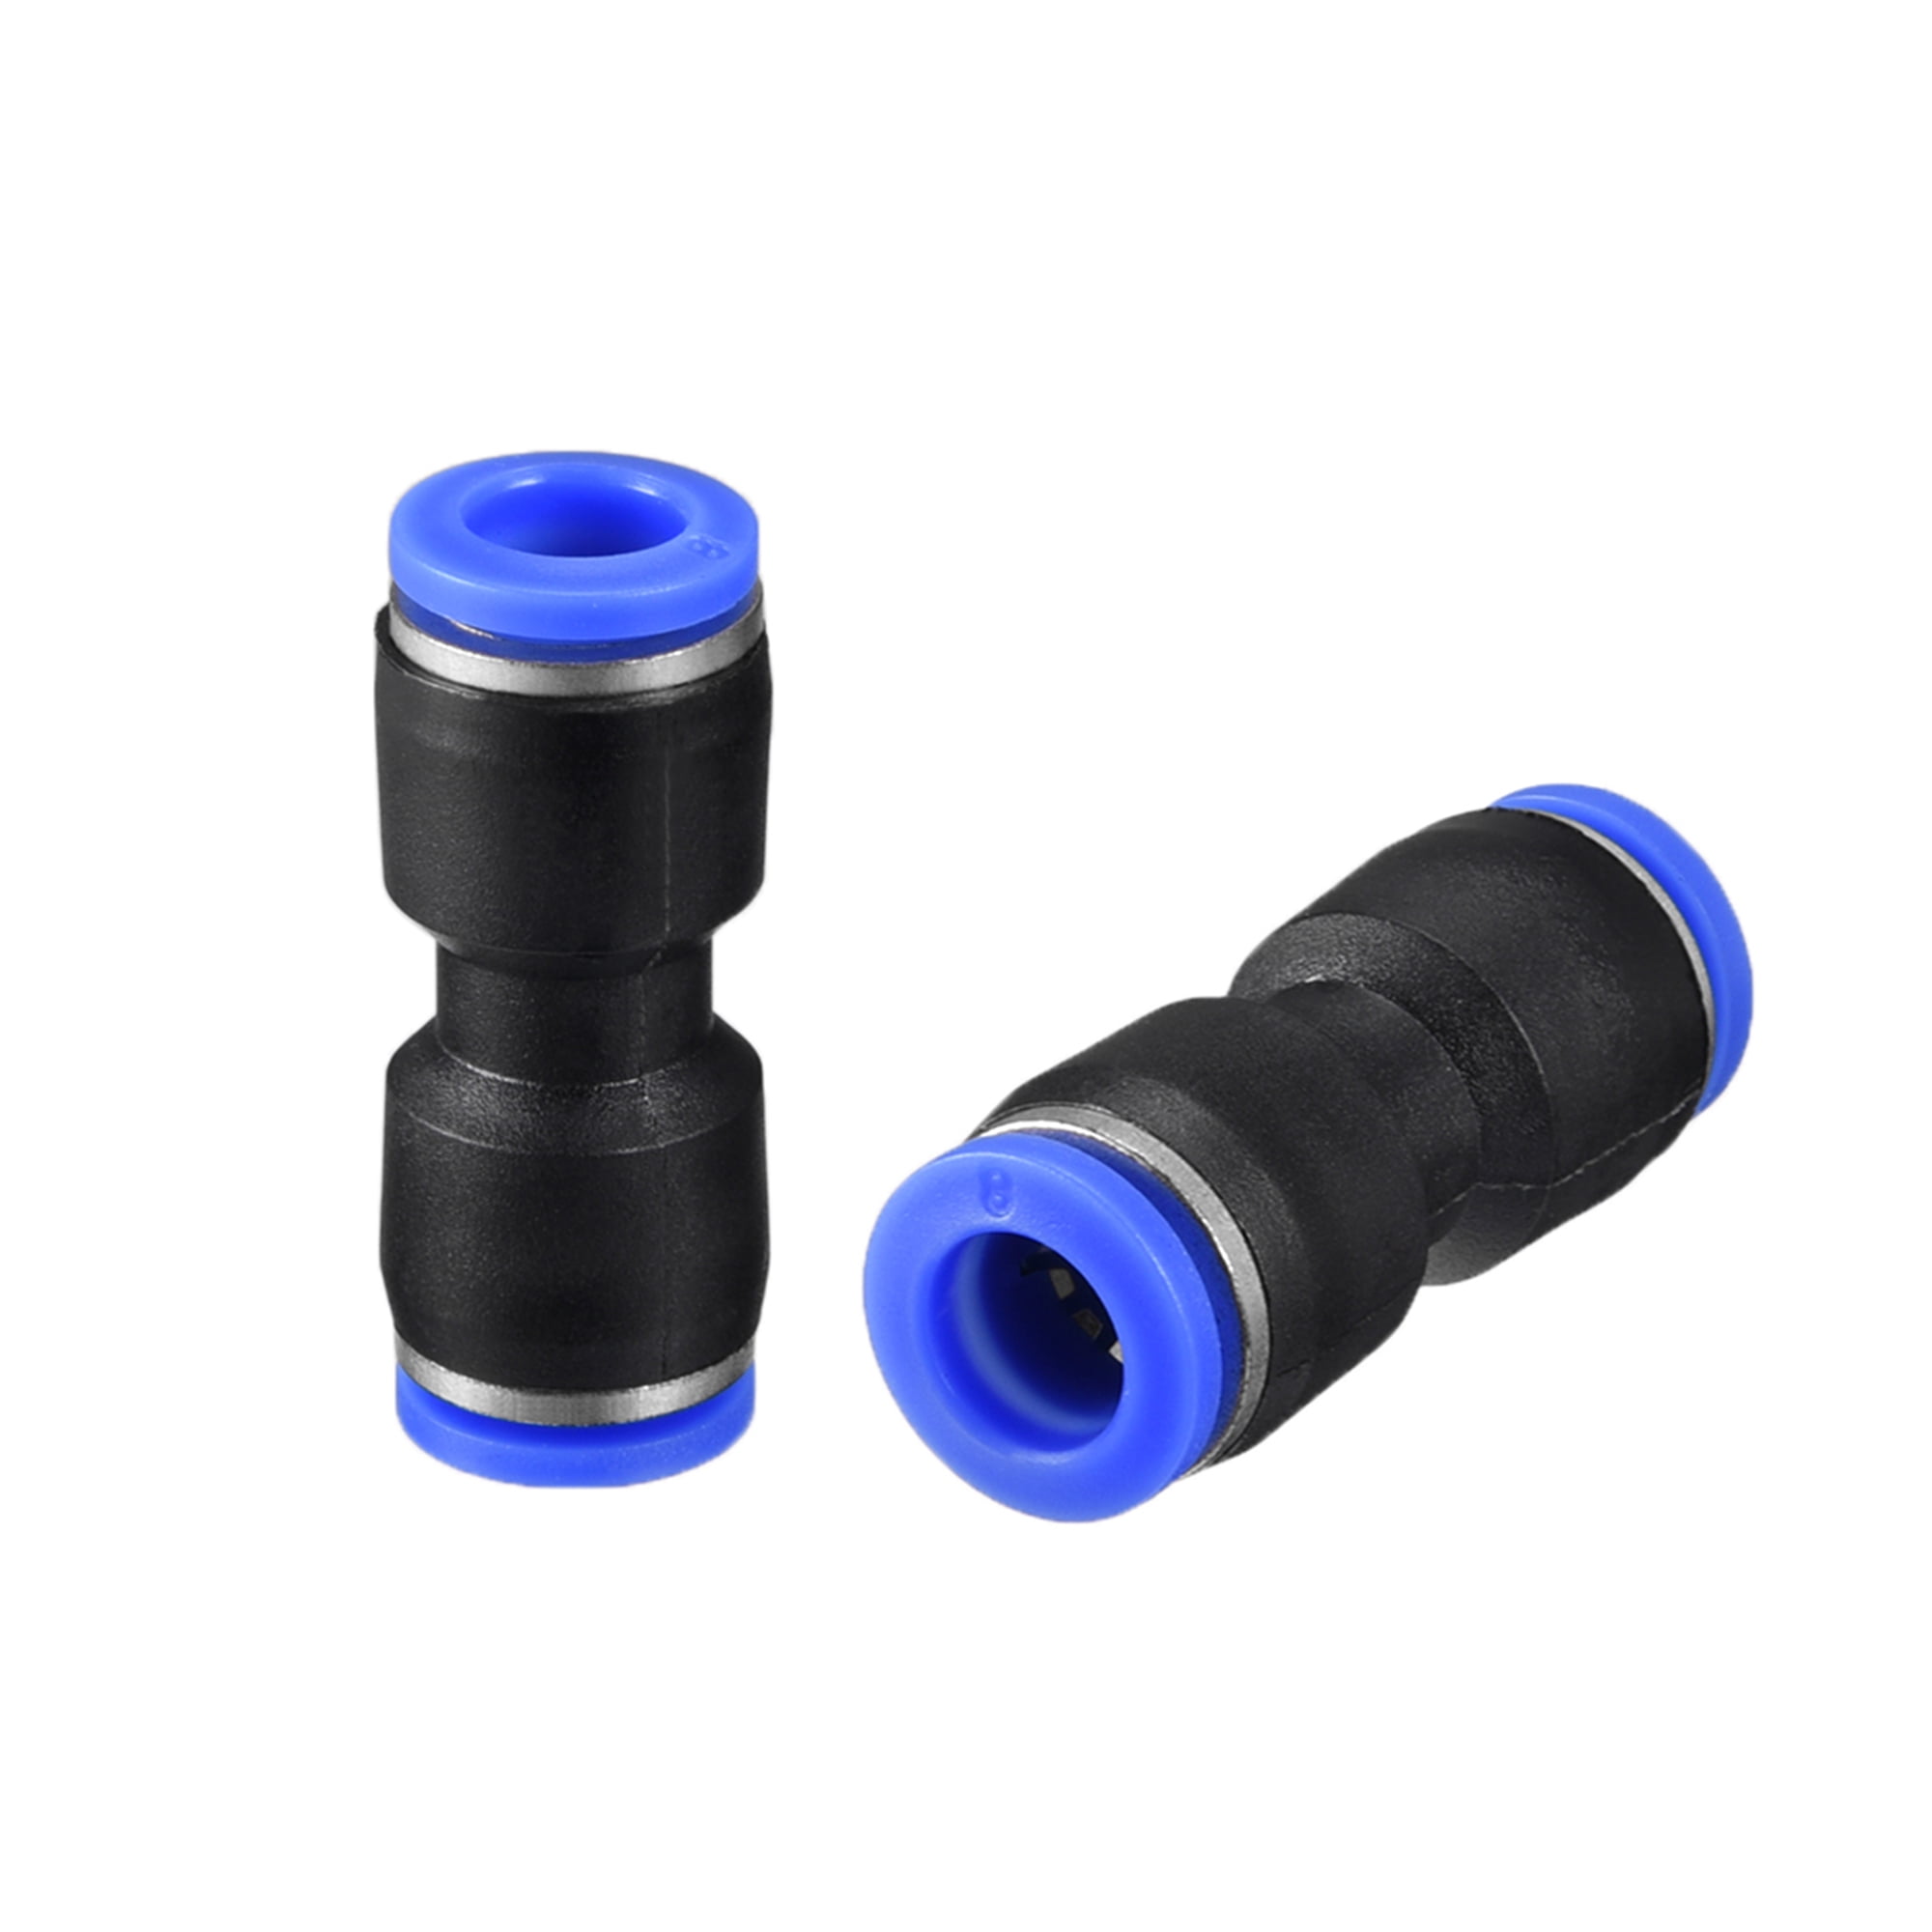 uxcell Plastic Straight Union Push to Connect Tube Fitting 8mm OD Push Fit Lock Blue 3pcs 